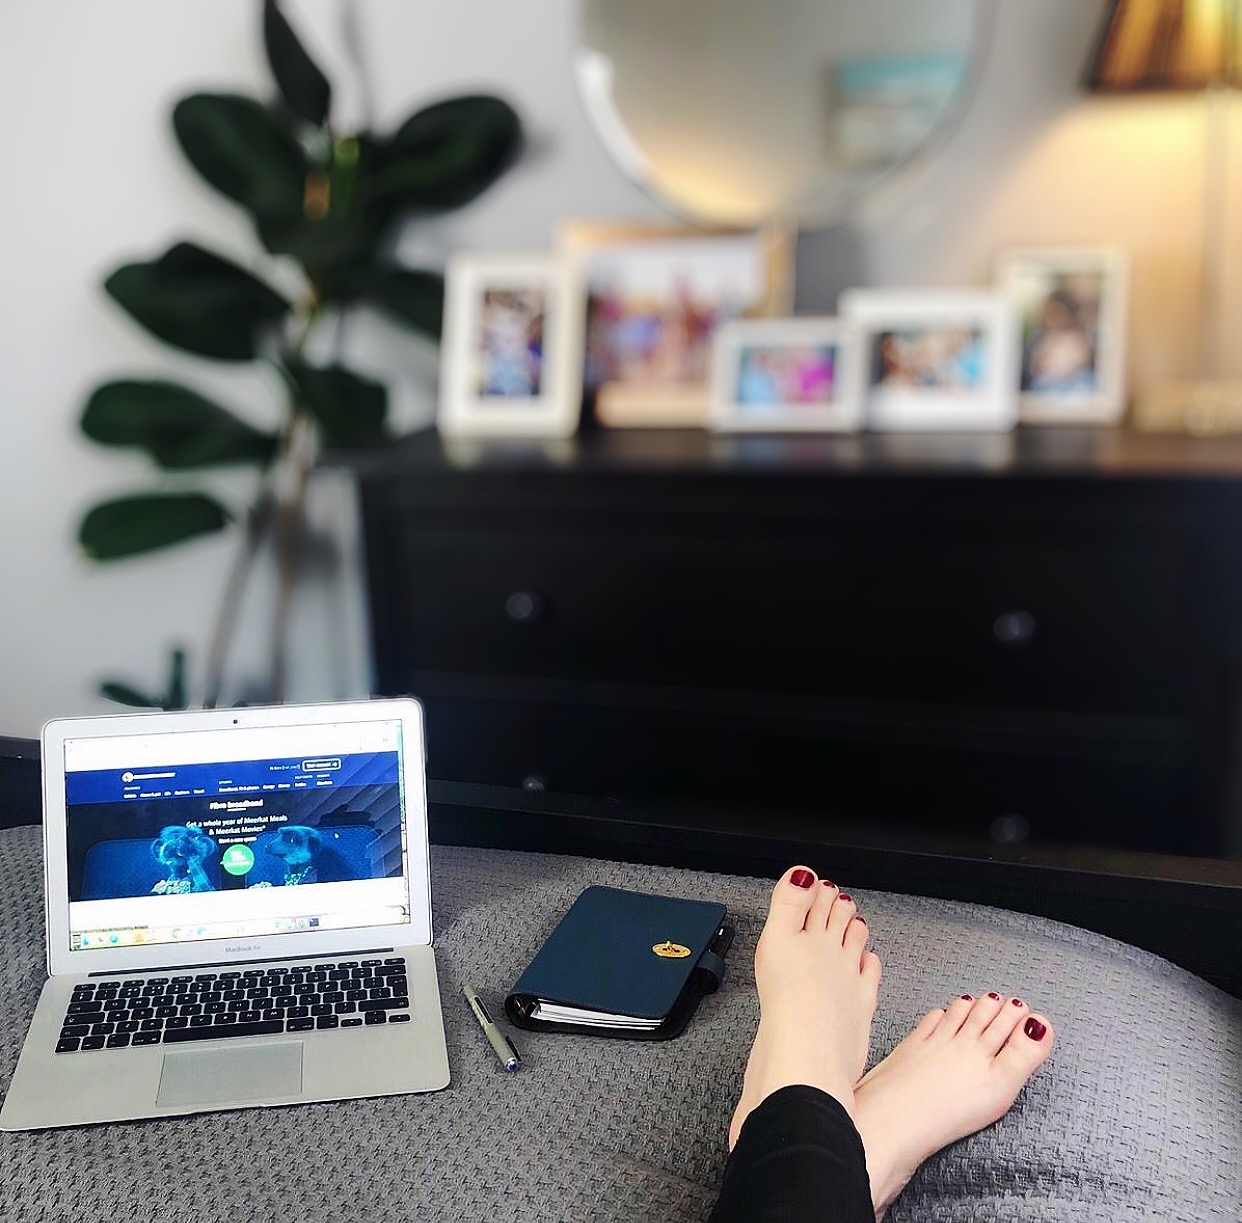 Legs on a bed with a laptop open showing a comparison website